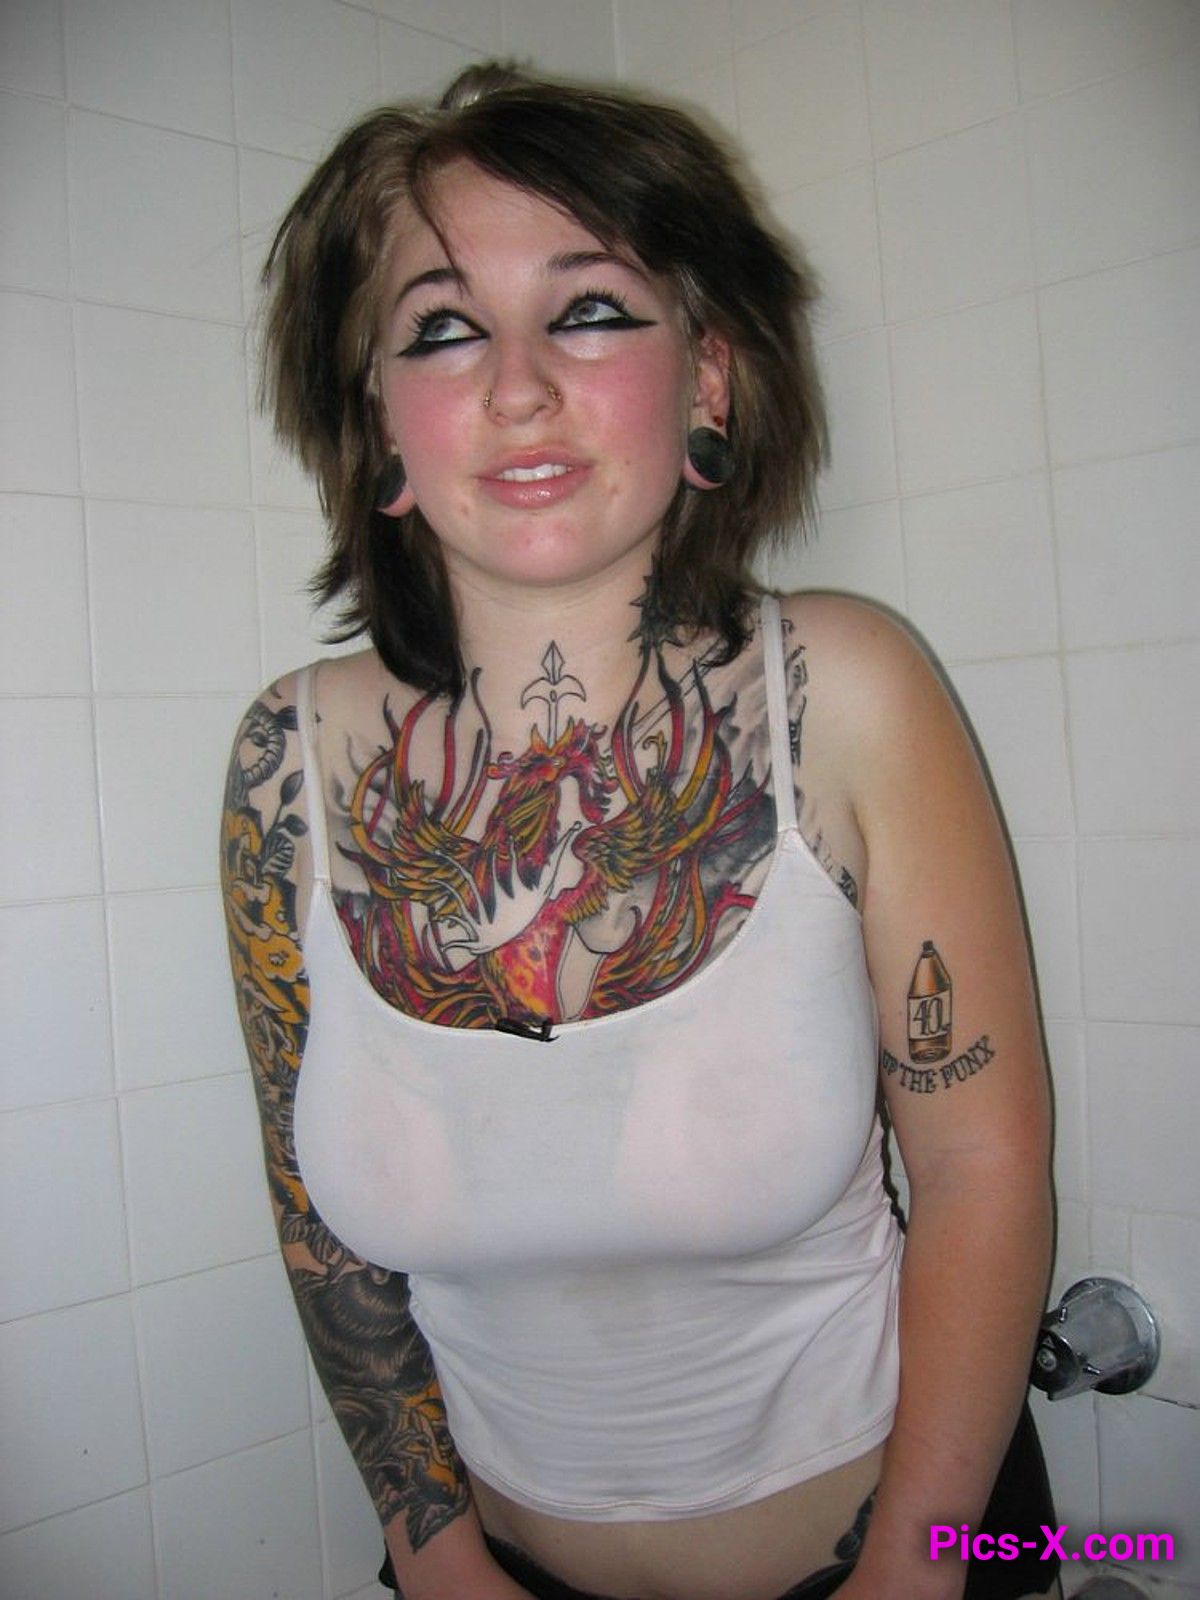 Tattooed girl with running makeup posing naked at home - Punk Rock Girlfriend - Image 7